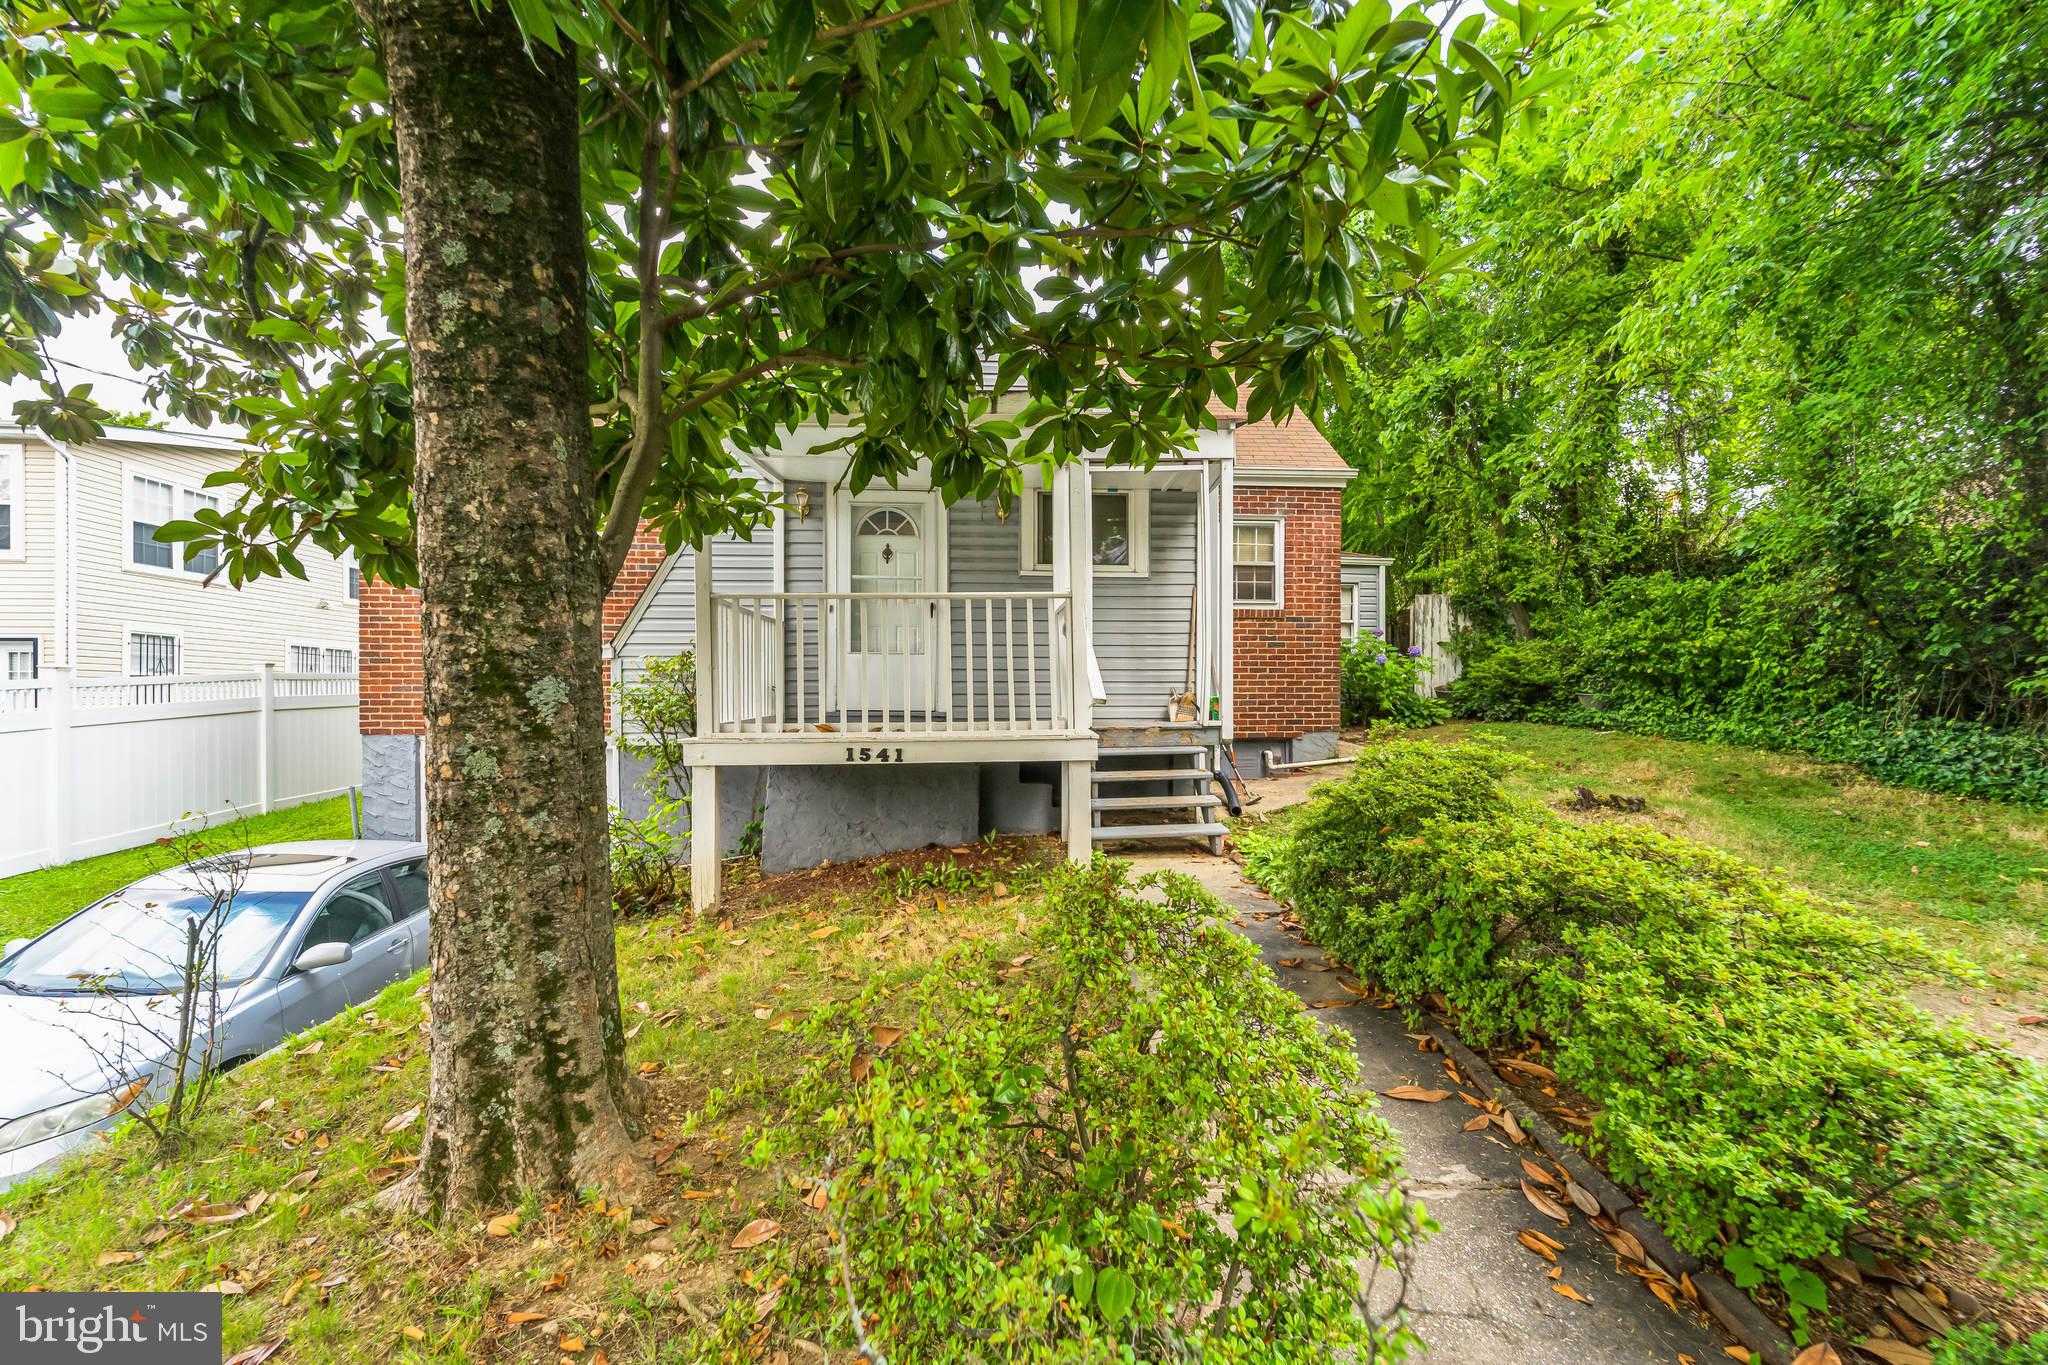 View CAPITOL HEIGHTS, MD 20743 house